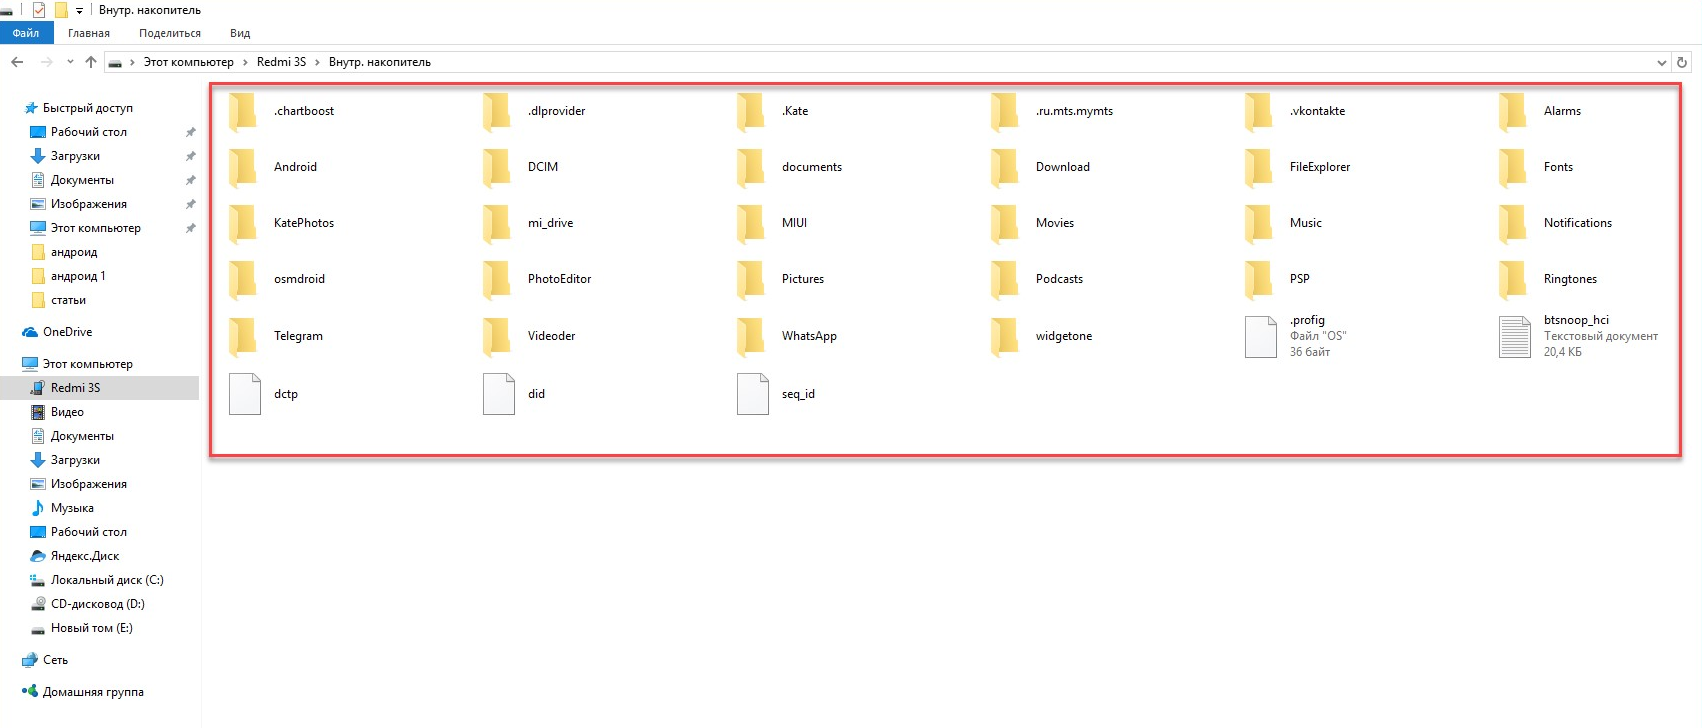 Image 9. Deleting and sorting phone files.